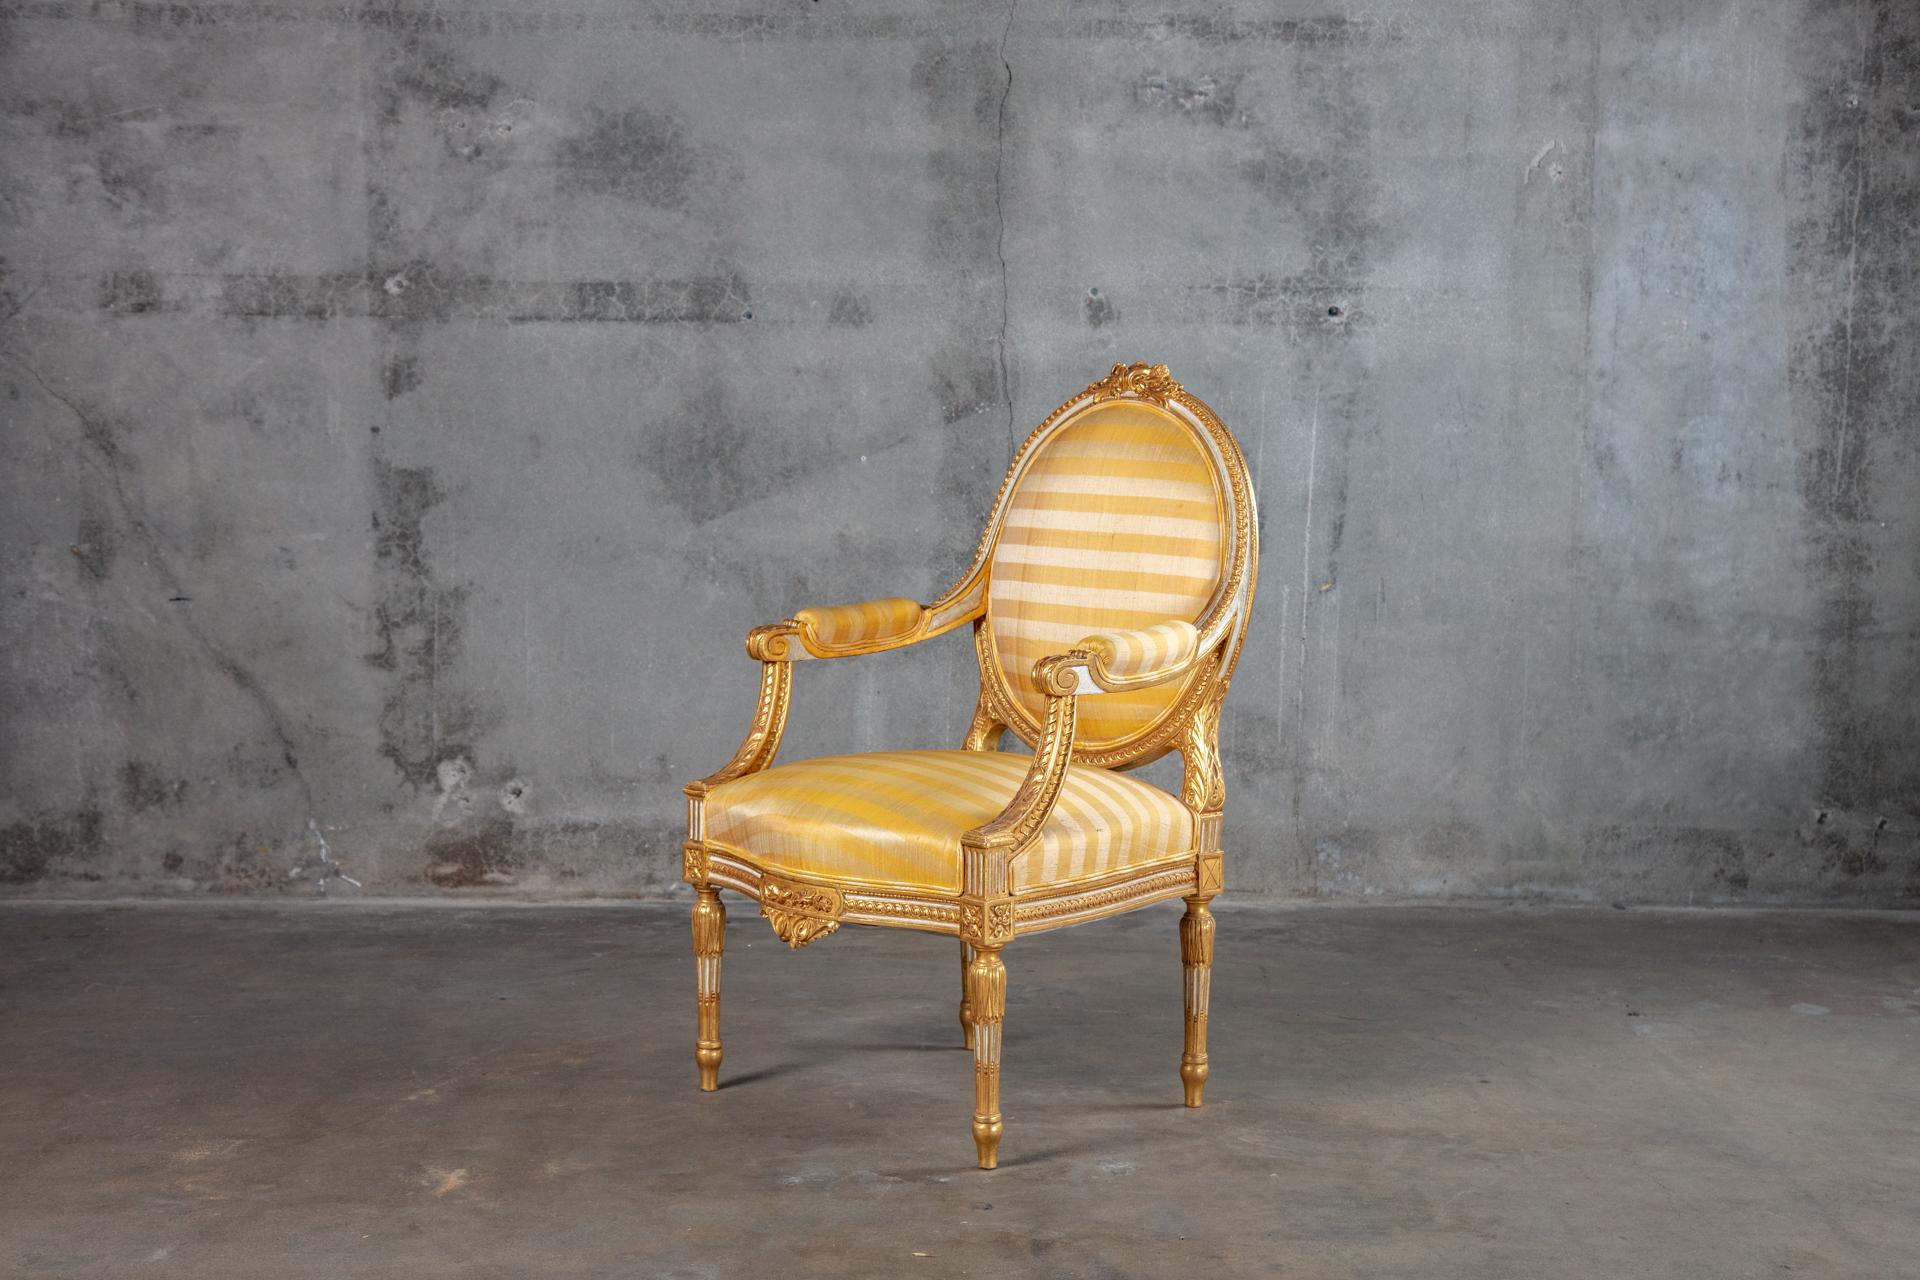 Pair of giltwood armchairs in upholstered in yellow striped fabric.